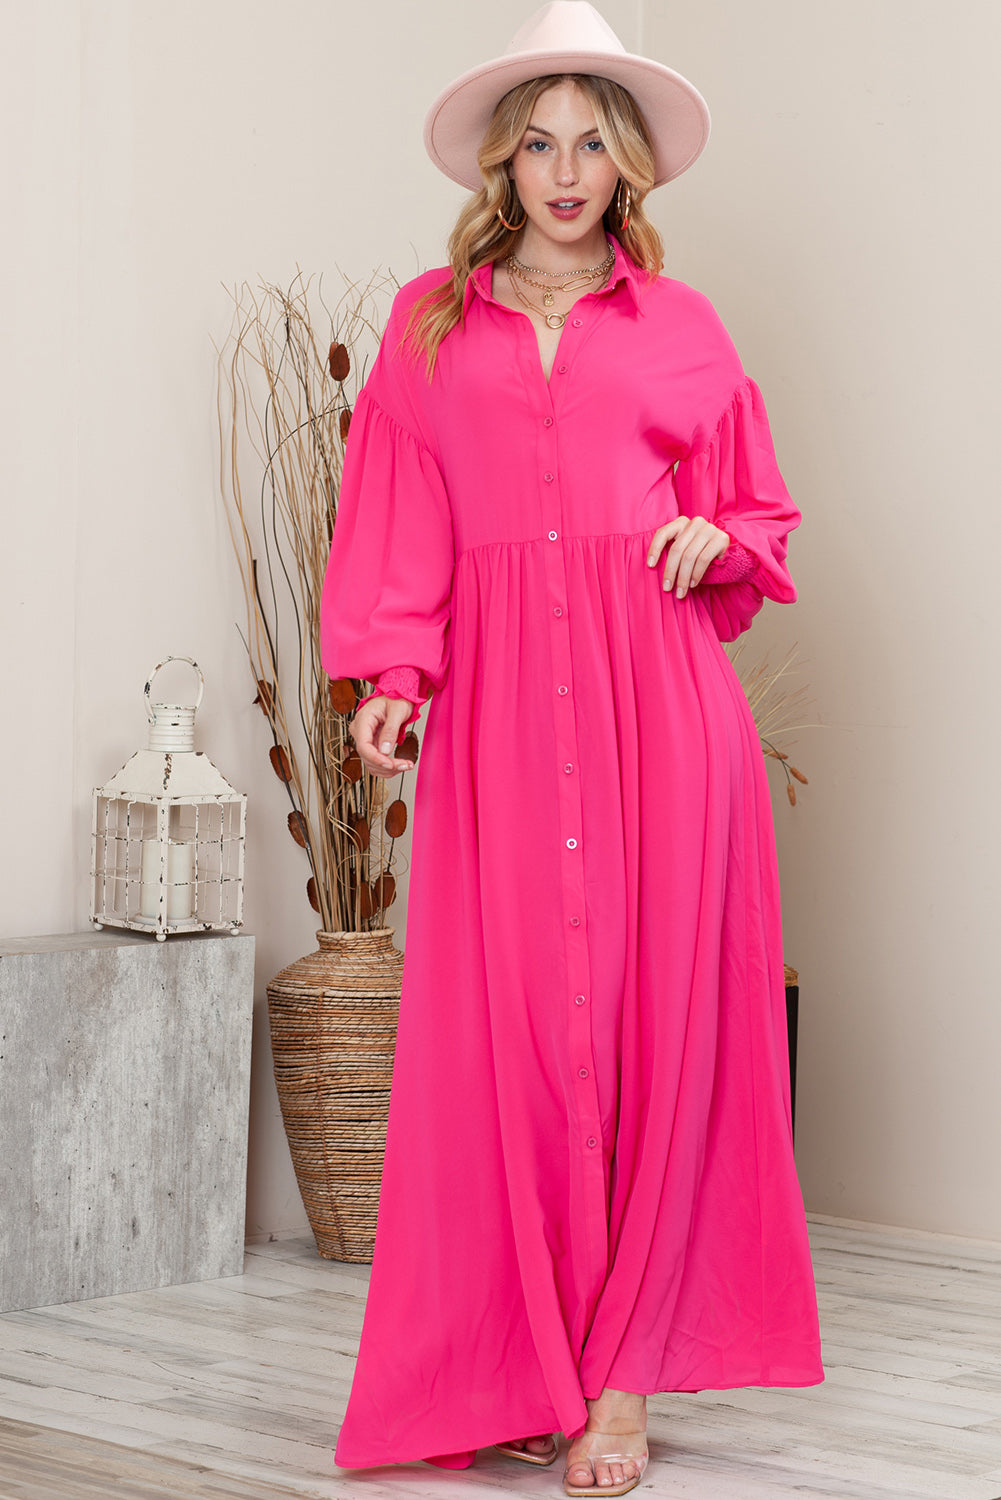 Rose Solid Color Bishop Sleeve Button Up Collared Shirt Dress